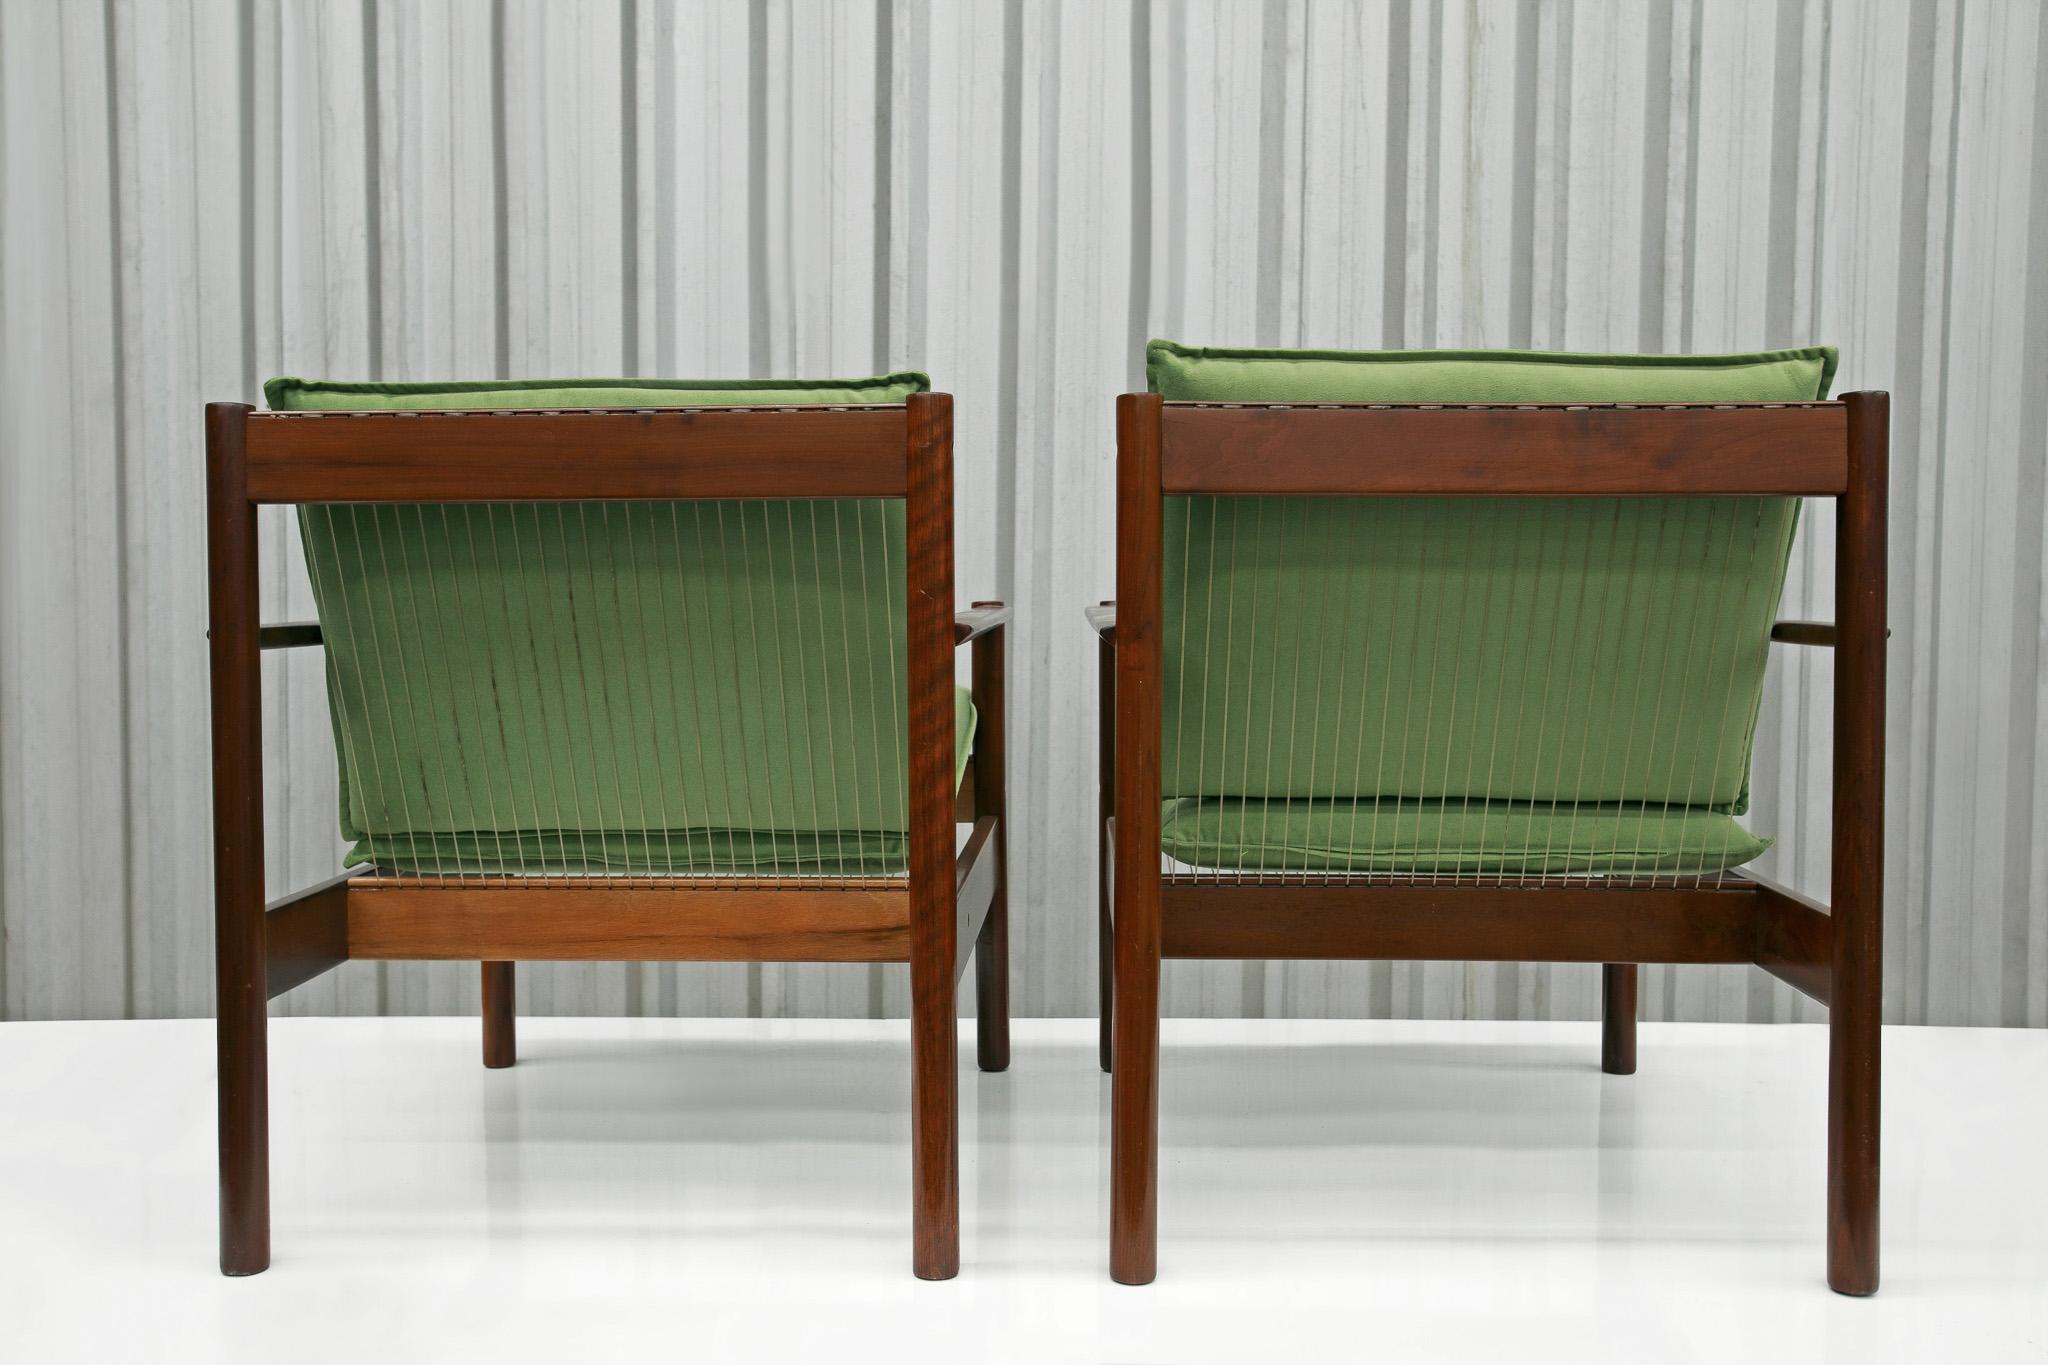 Brazilian Modern Armchairs in Hardwood & Fabric, Michel Arnoult, 1960s In Good Condition For Sale In New York, NY